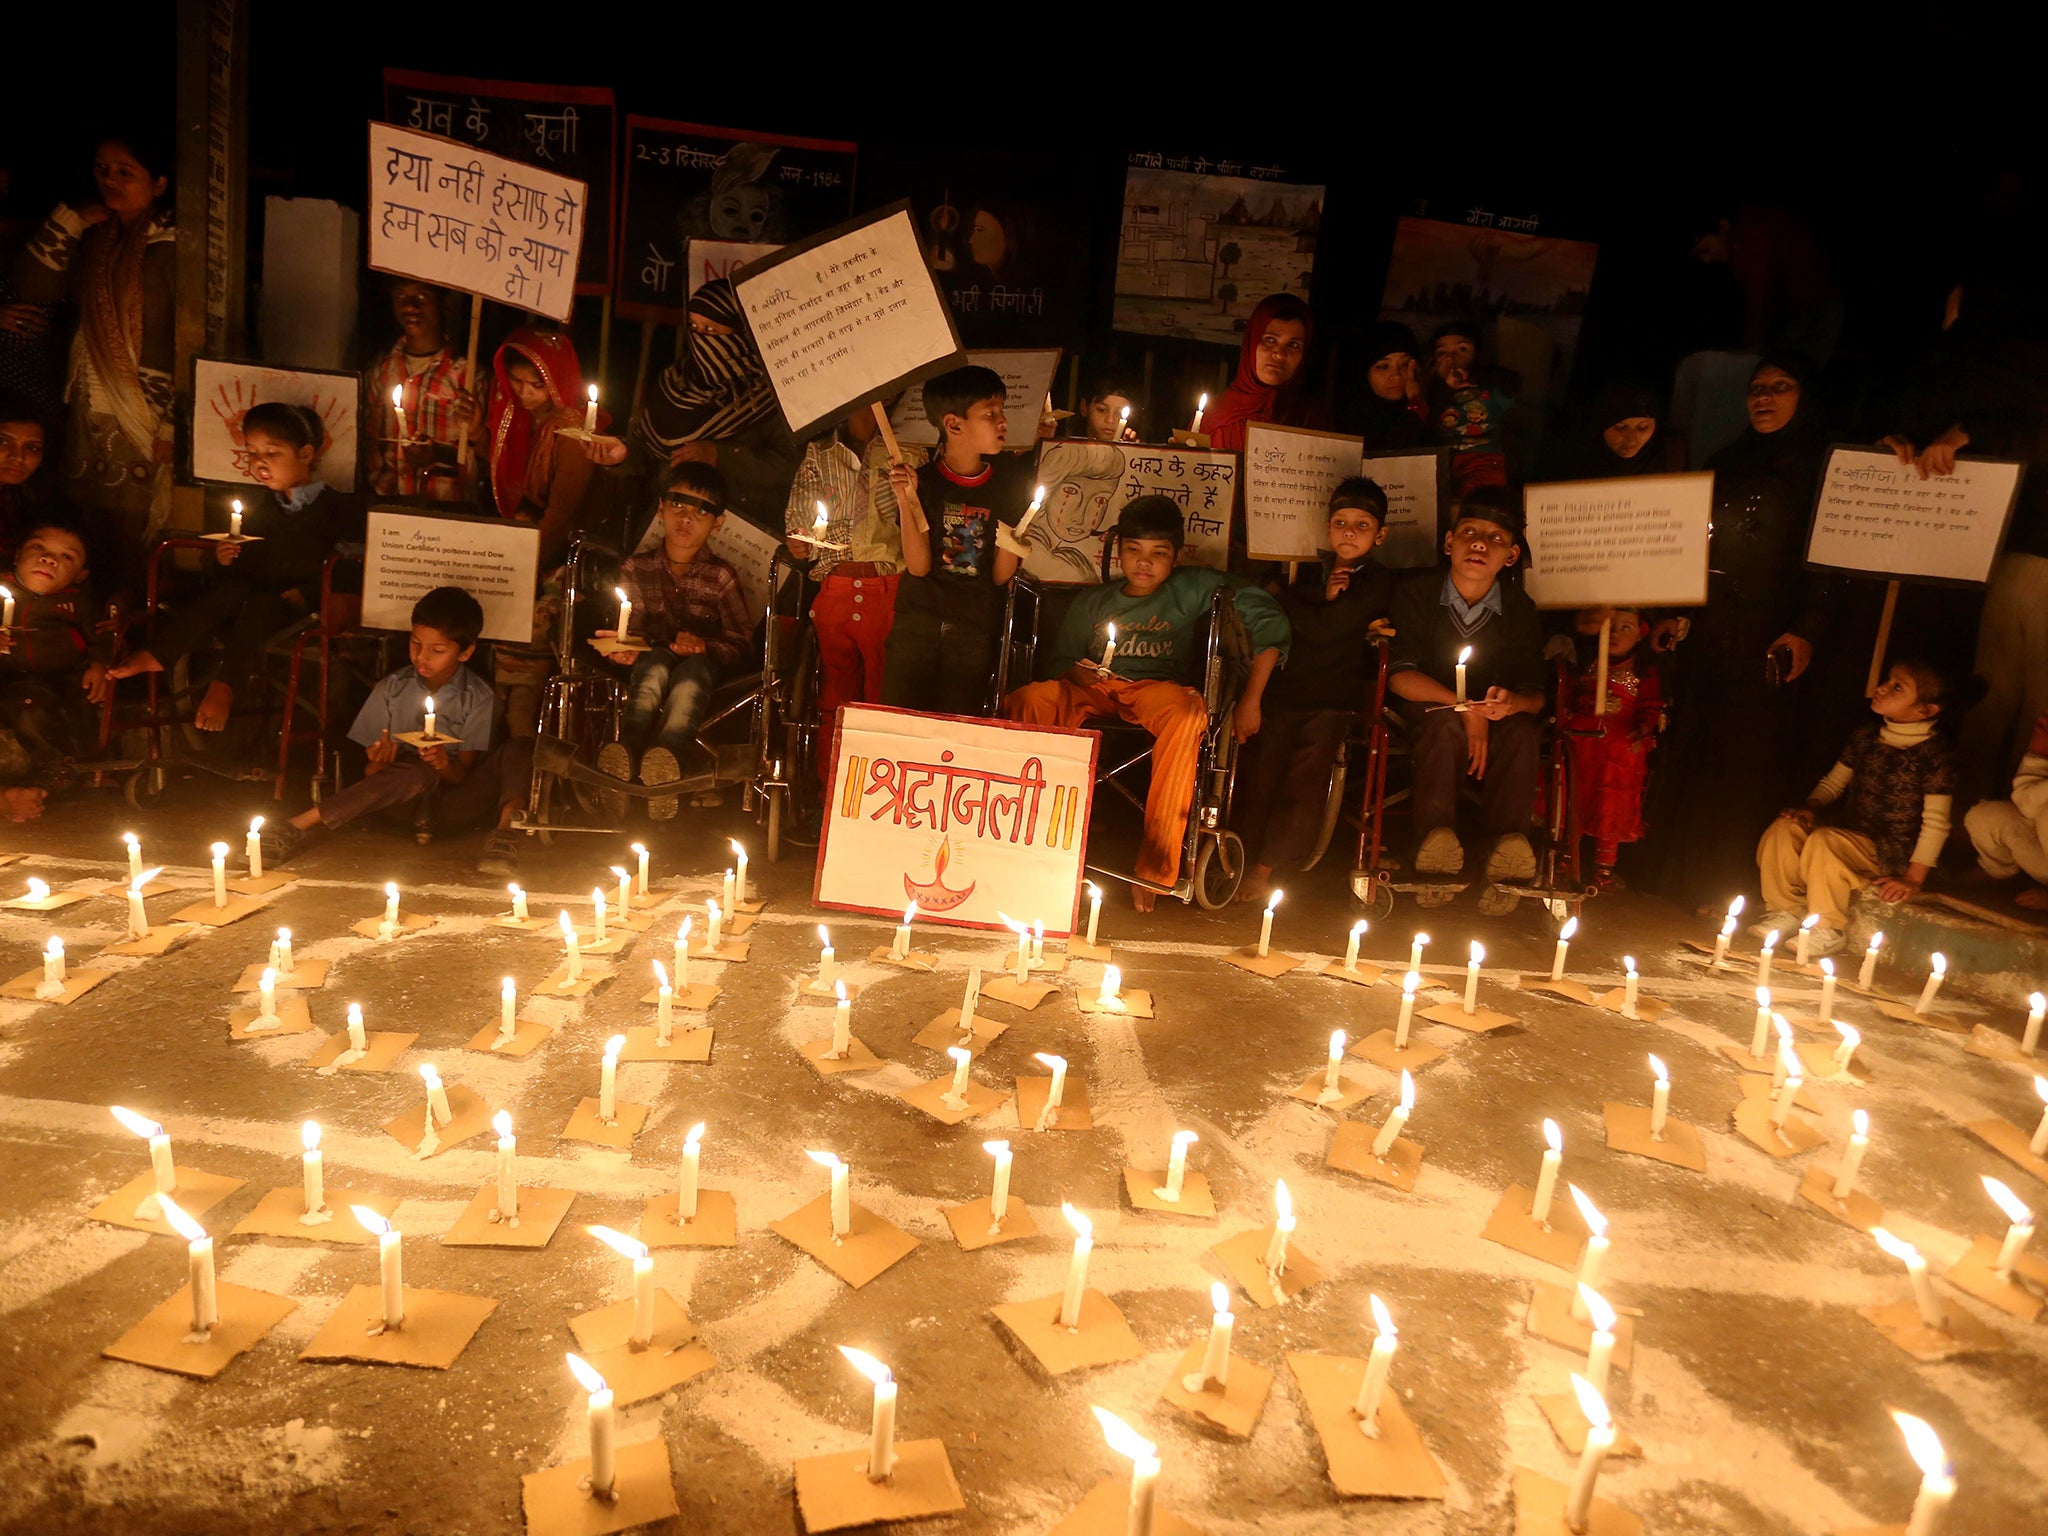 Indian children born with congenital disease, second generation victims of the1984 Bhopal gas tragedy, participate in a candle light vigil